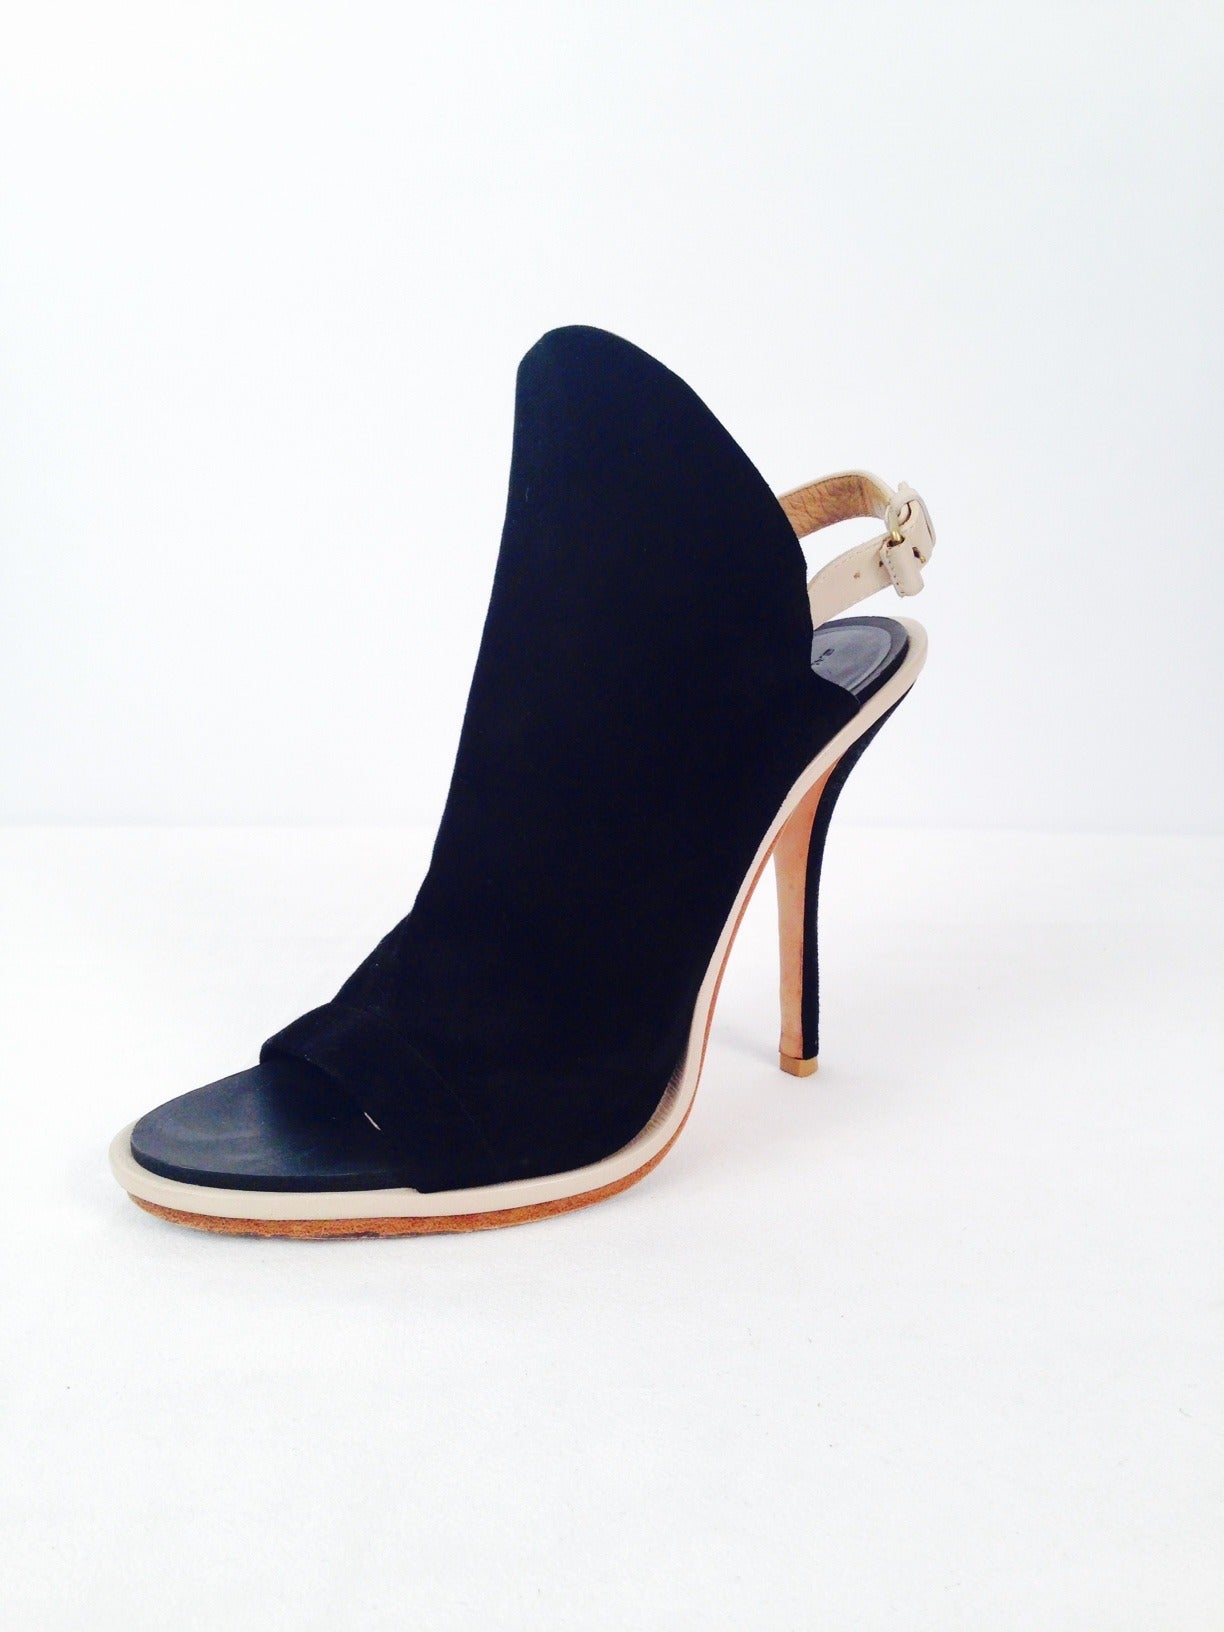 Black Suede Peep Toe Sling Backs remain true to the design philosophy of one of fashion's most celebrated couturiers, Cristobal Balenciaga.  Fashion-forward, yet elegant, shoes feature supple black suede vamps and black suede covered high heels. 